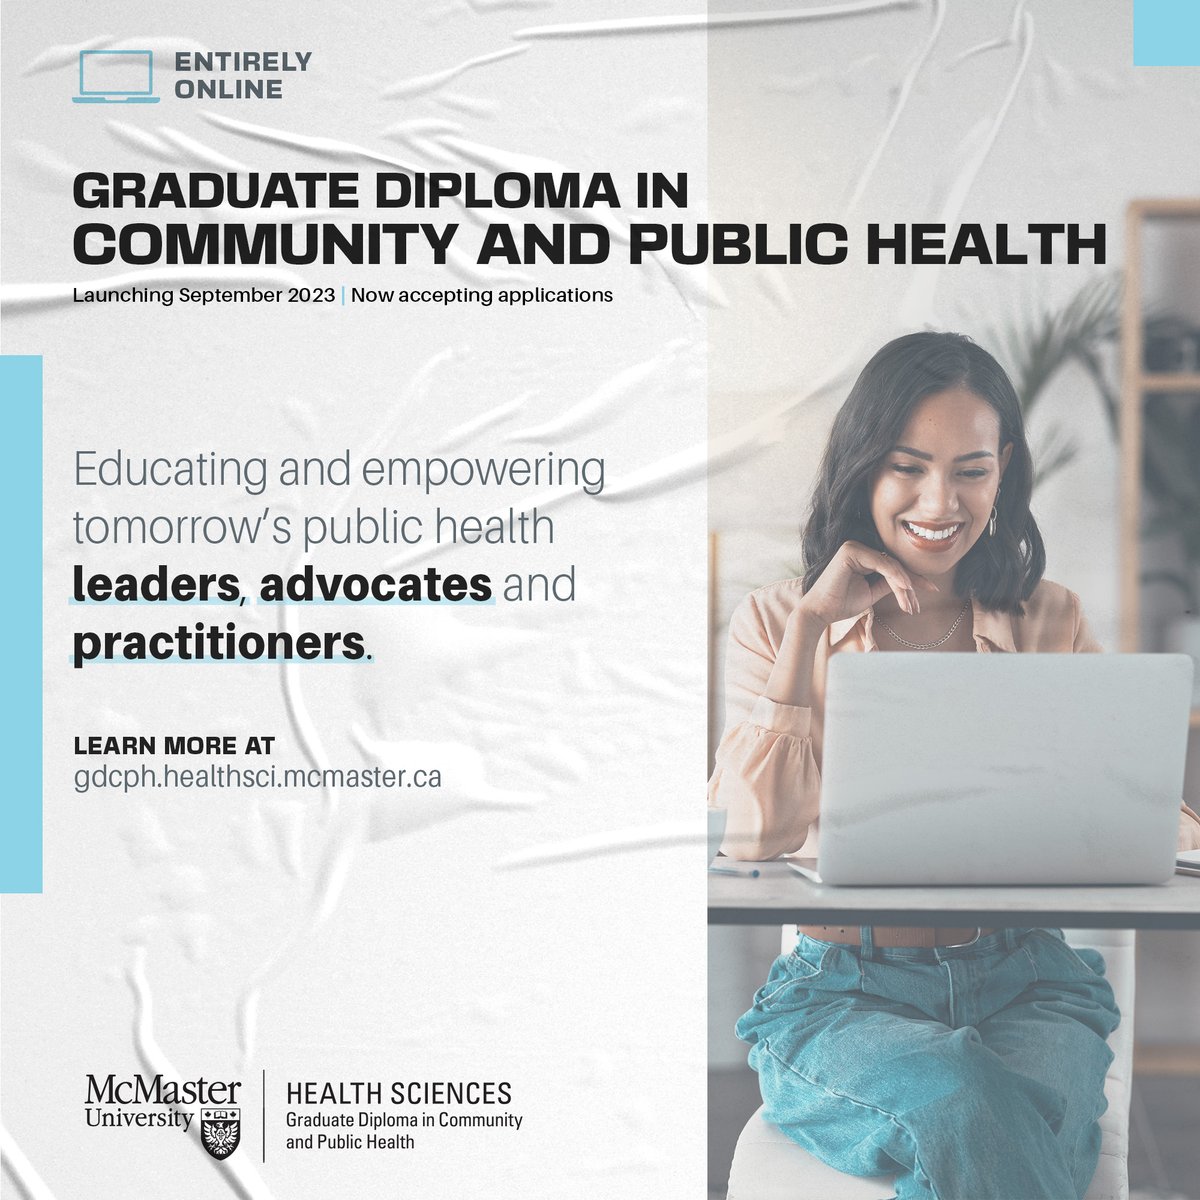 Learn more about @McMasterU's new Graduate Diploma in Community and Public Health by visiting our virtual booth at #TOPHC2023!